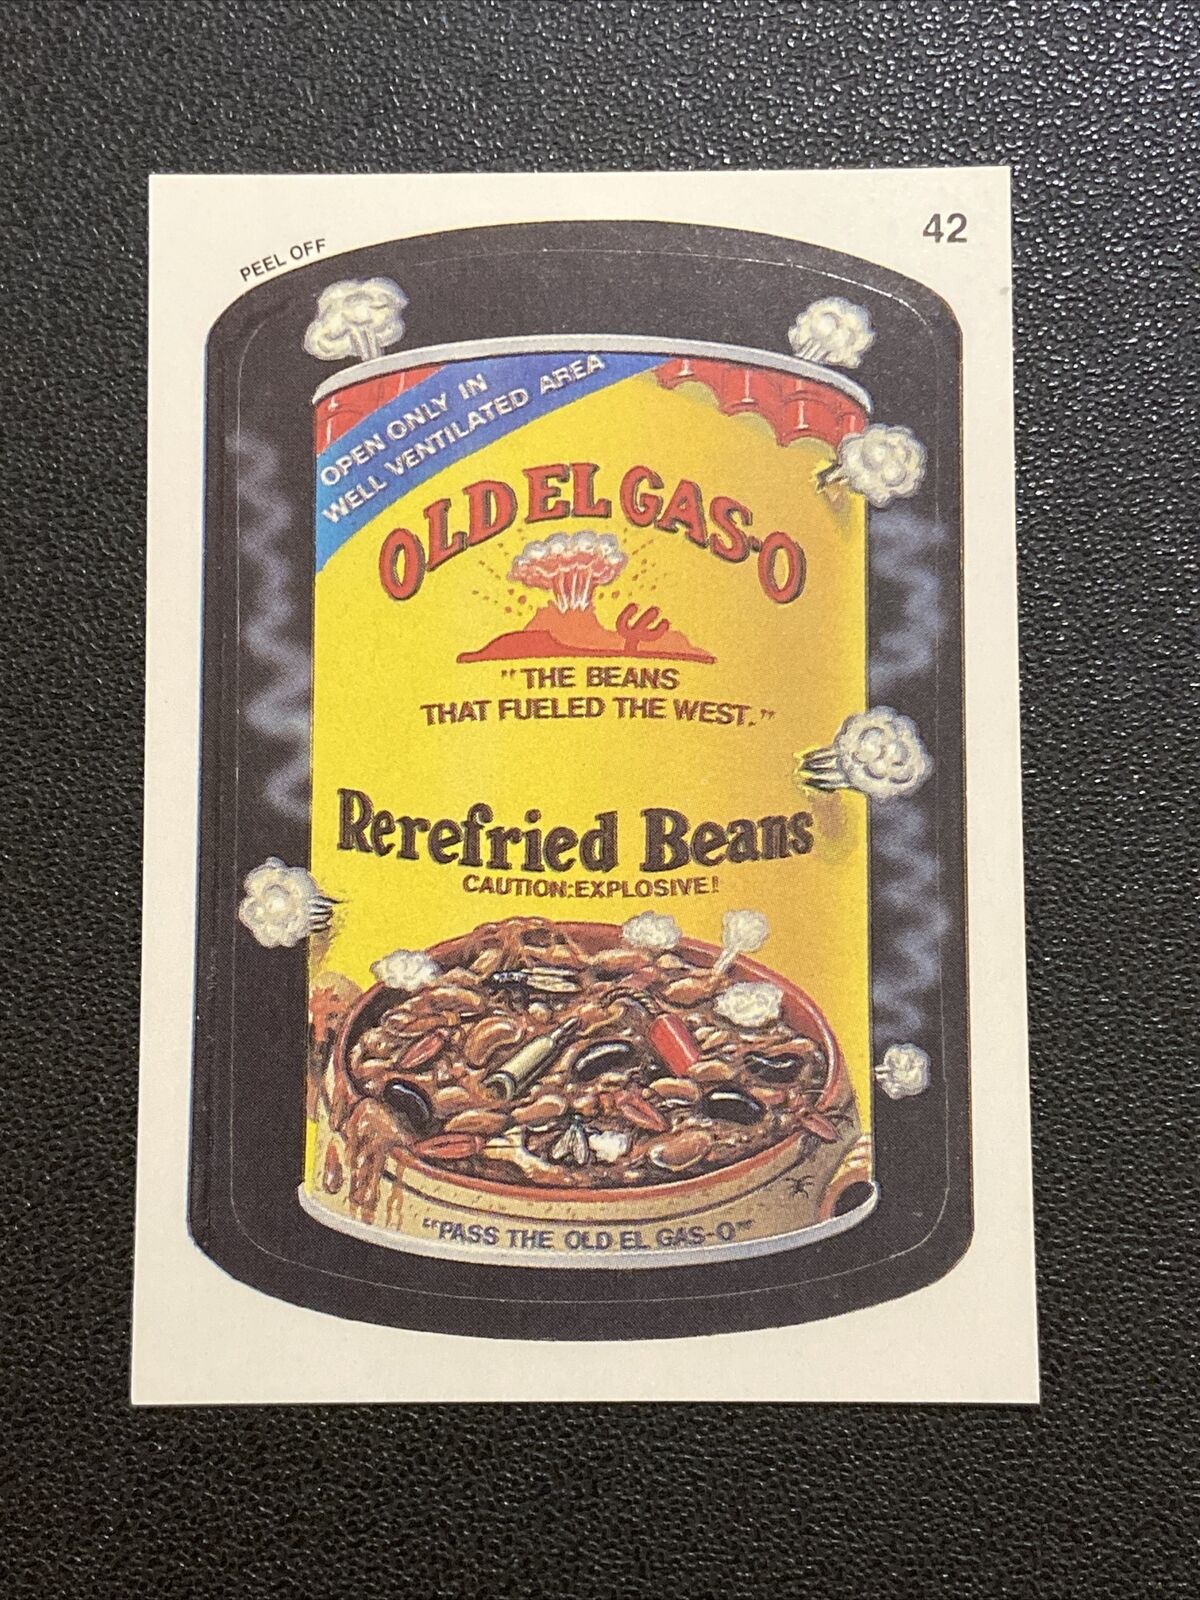 1991 Topps Wacky Packages Sticker #42 OLD EL GAS-O